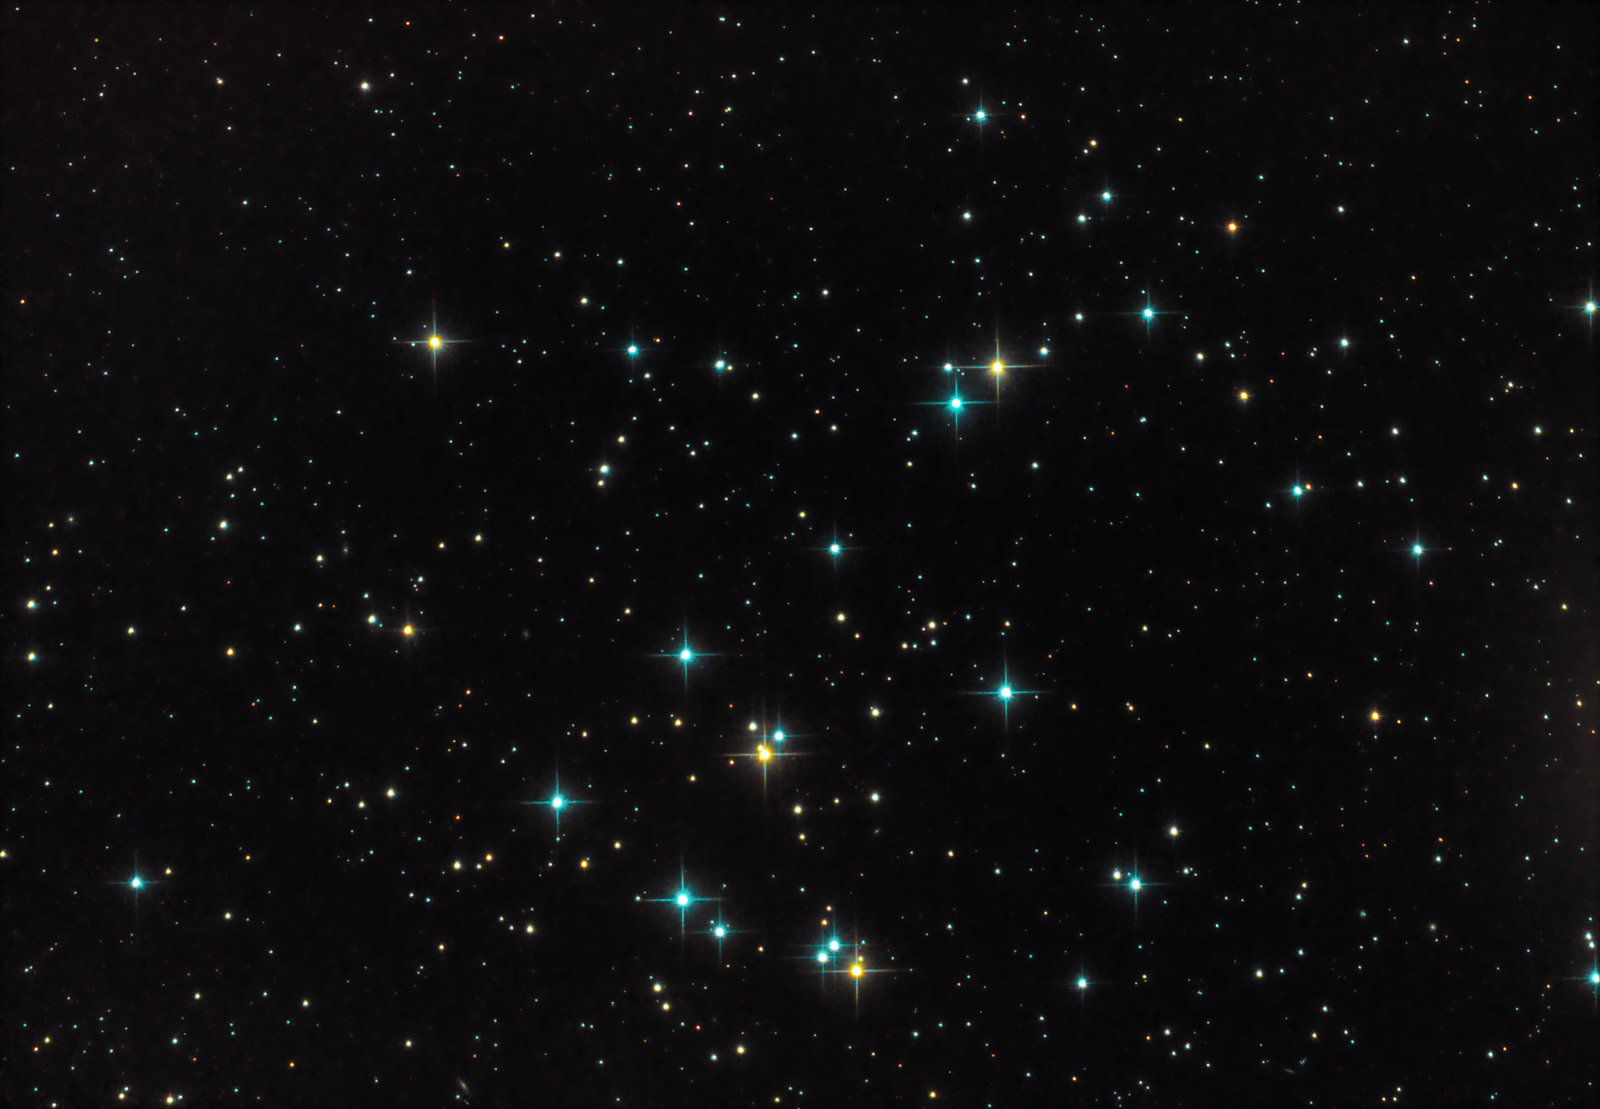 M44 - the Beehive cluster